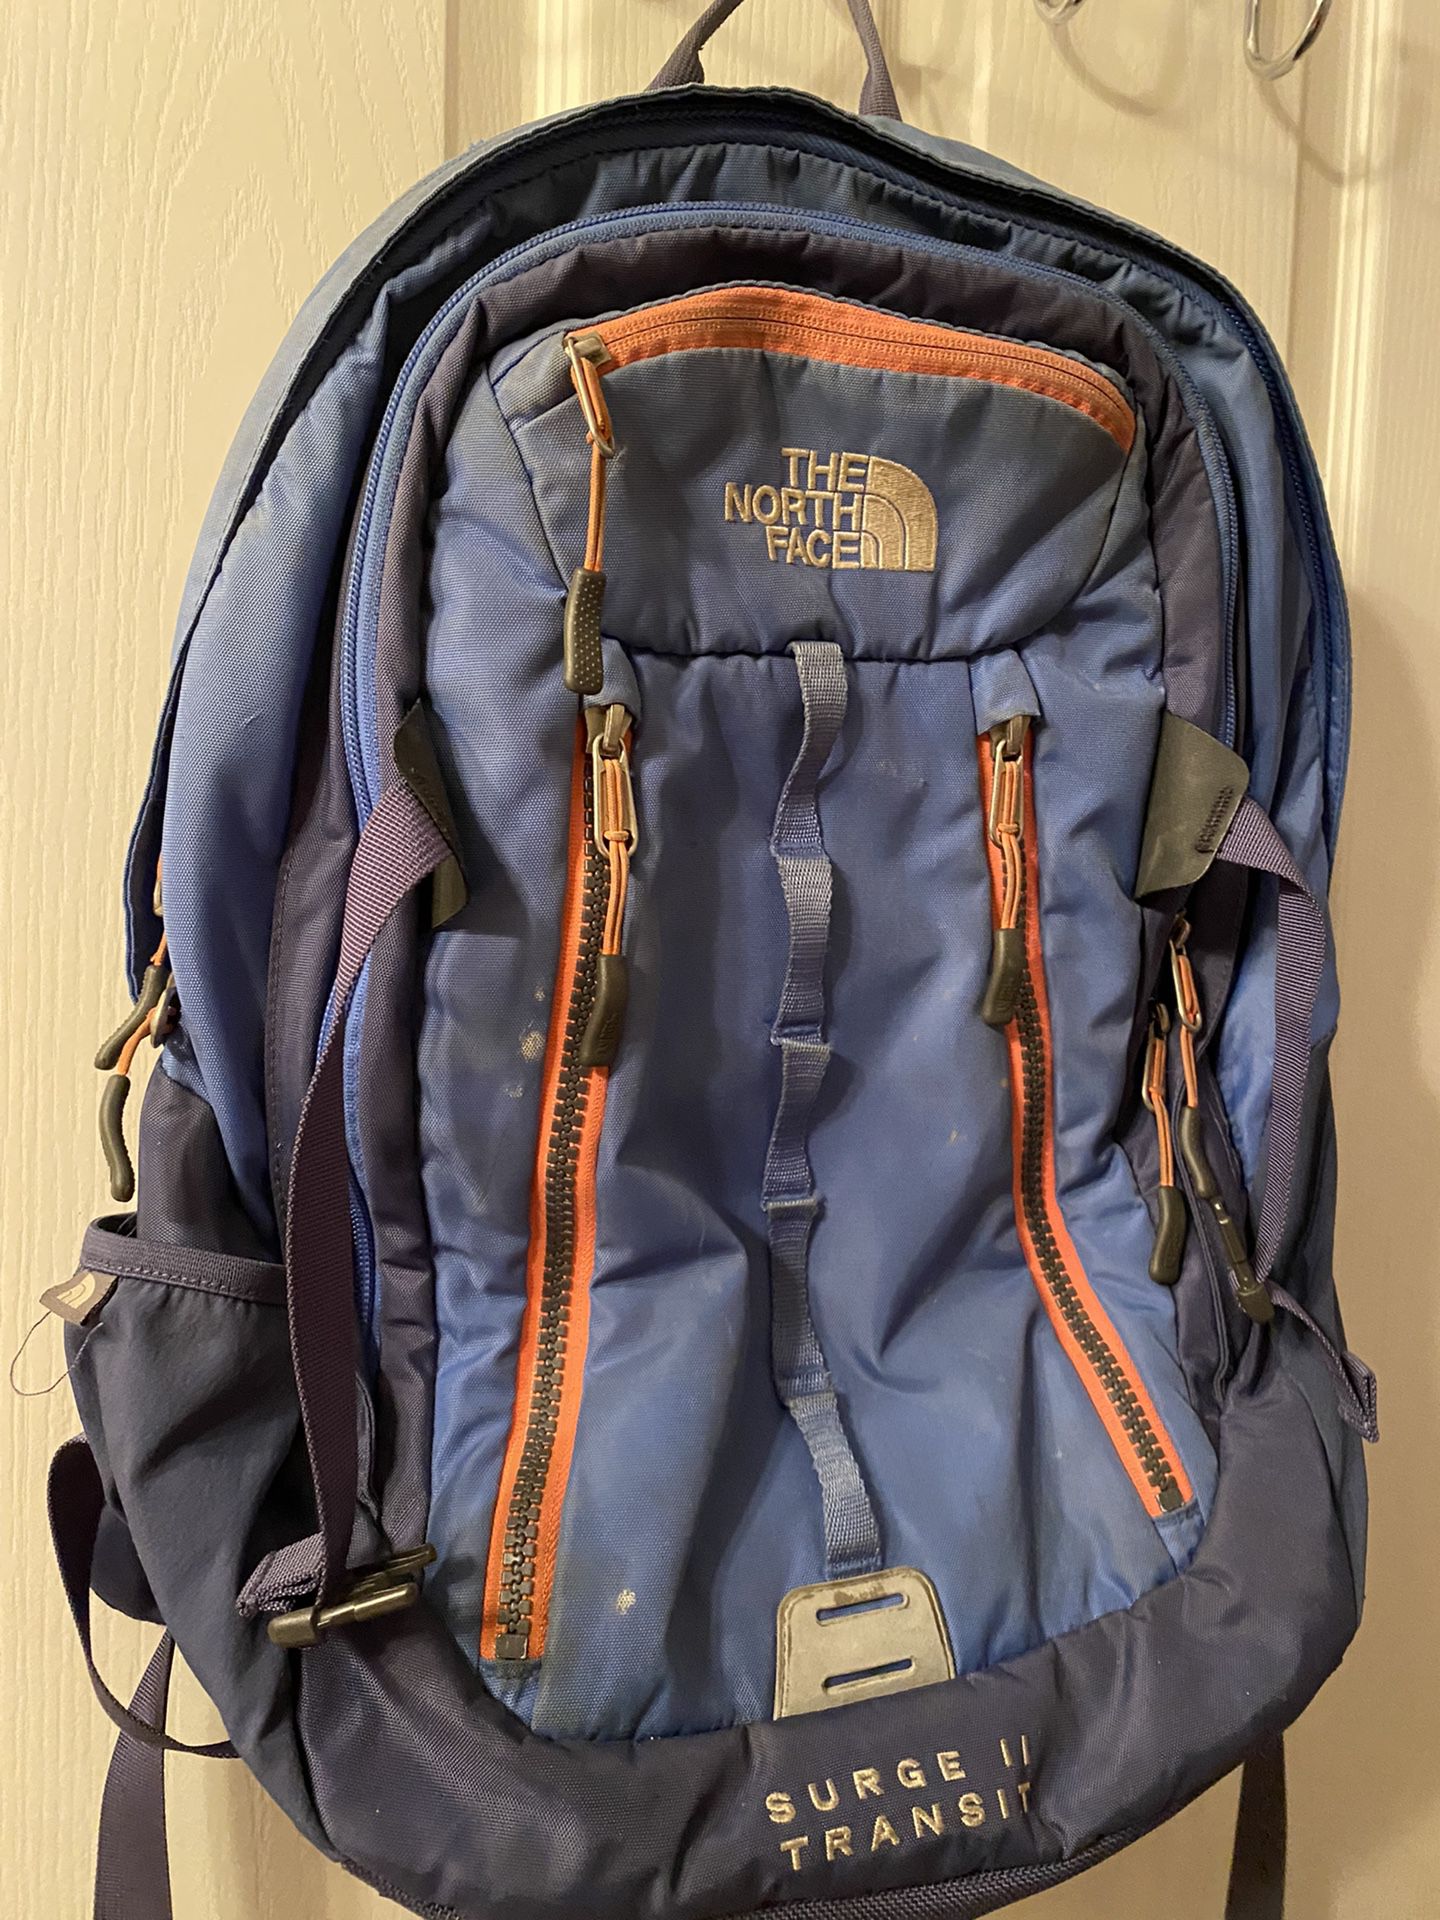 Northface Backpack And Hiking Boots